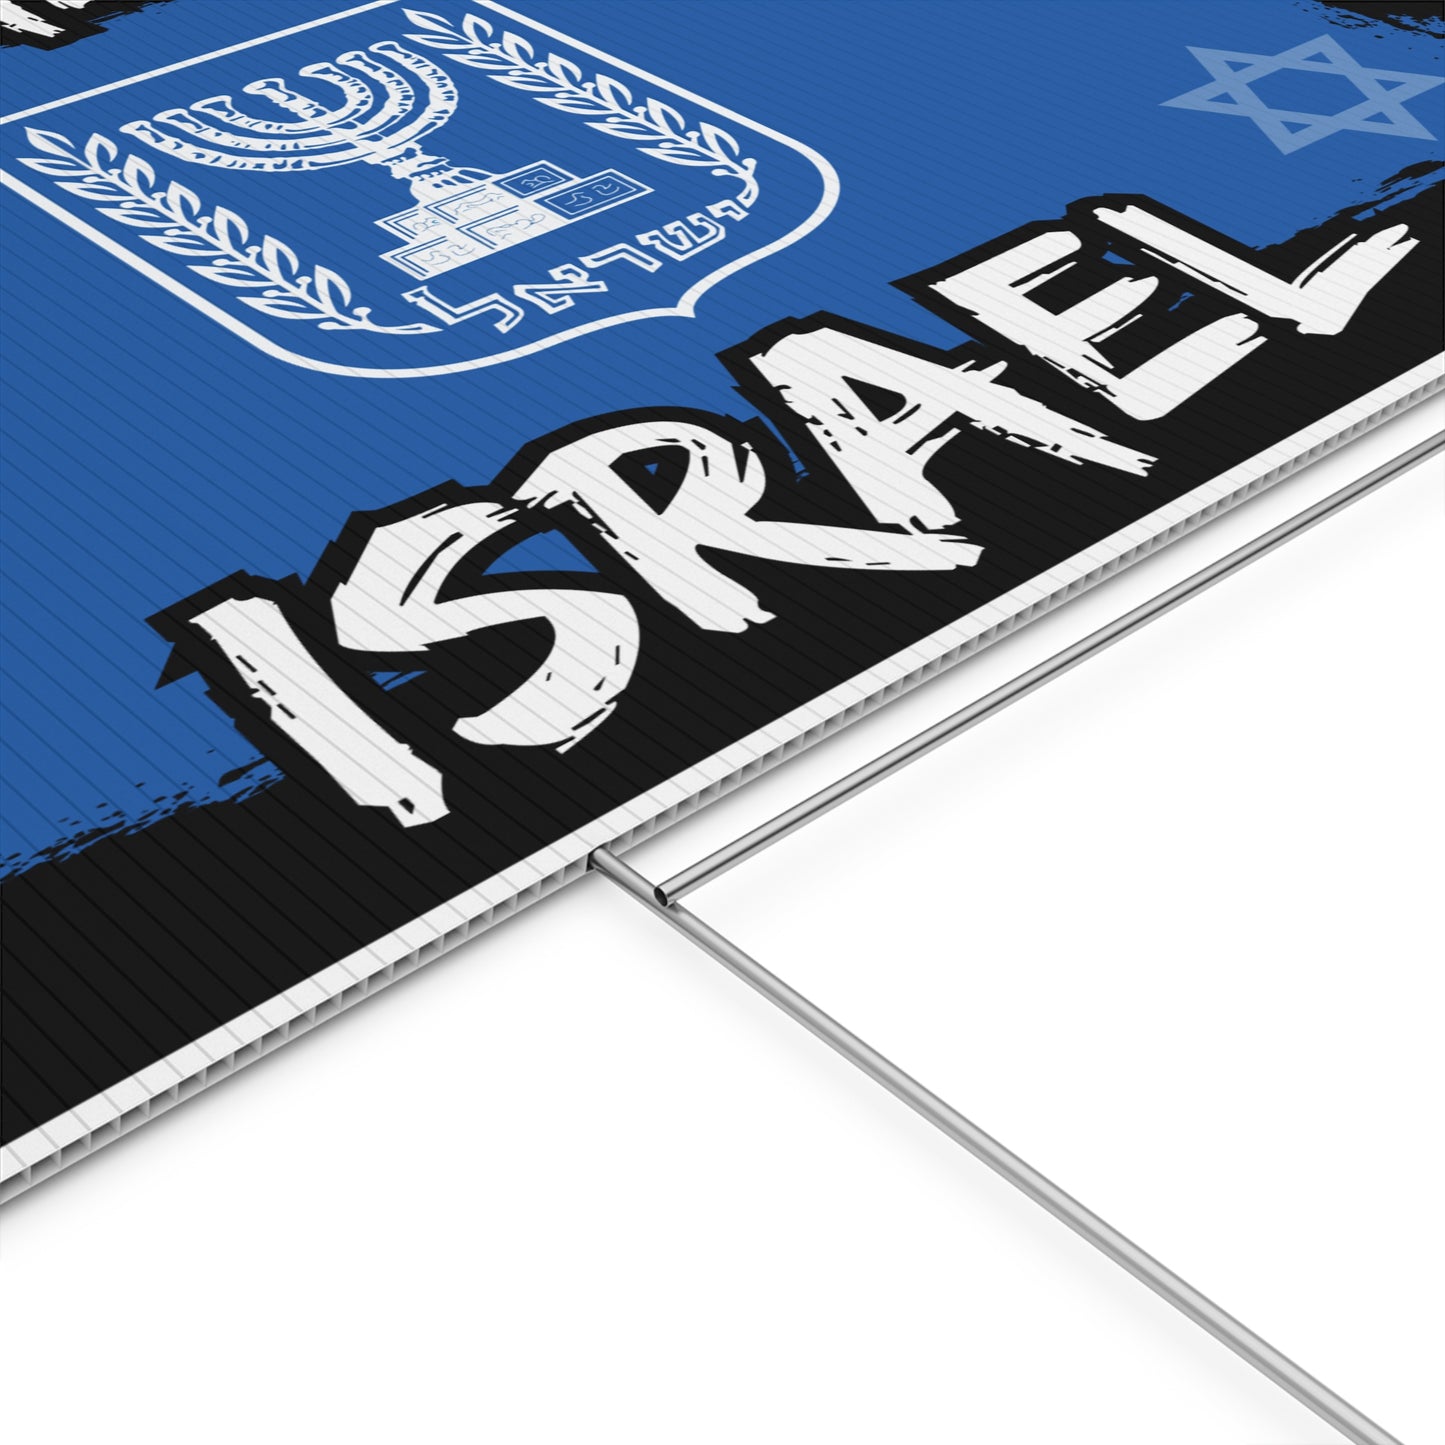 Stand with Israel, Support Israel, Emblem of Israel, Yard Sign, 18x12, 24x18, or 36x24 inch, Double Sided, H-Stake Included, v4